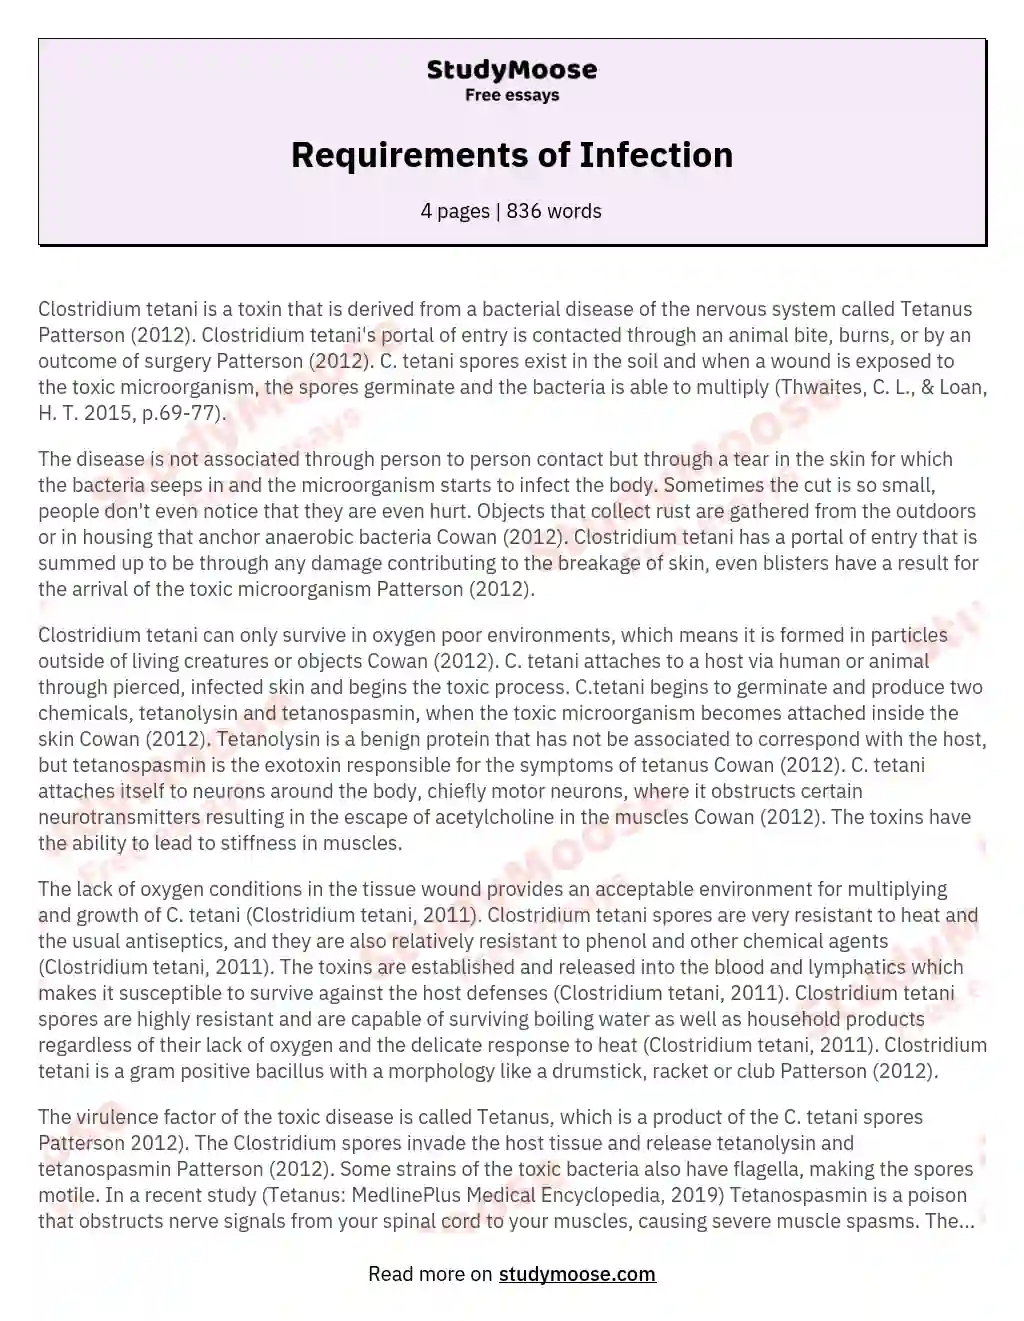 Requirements of Infection essay